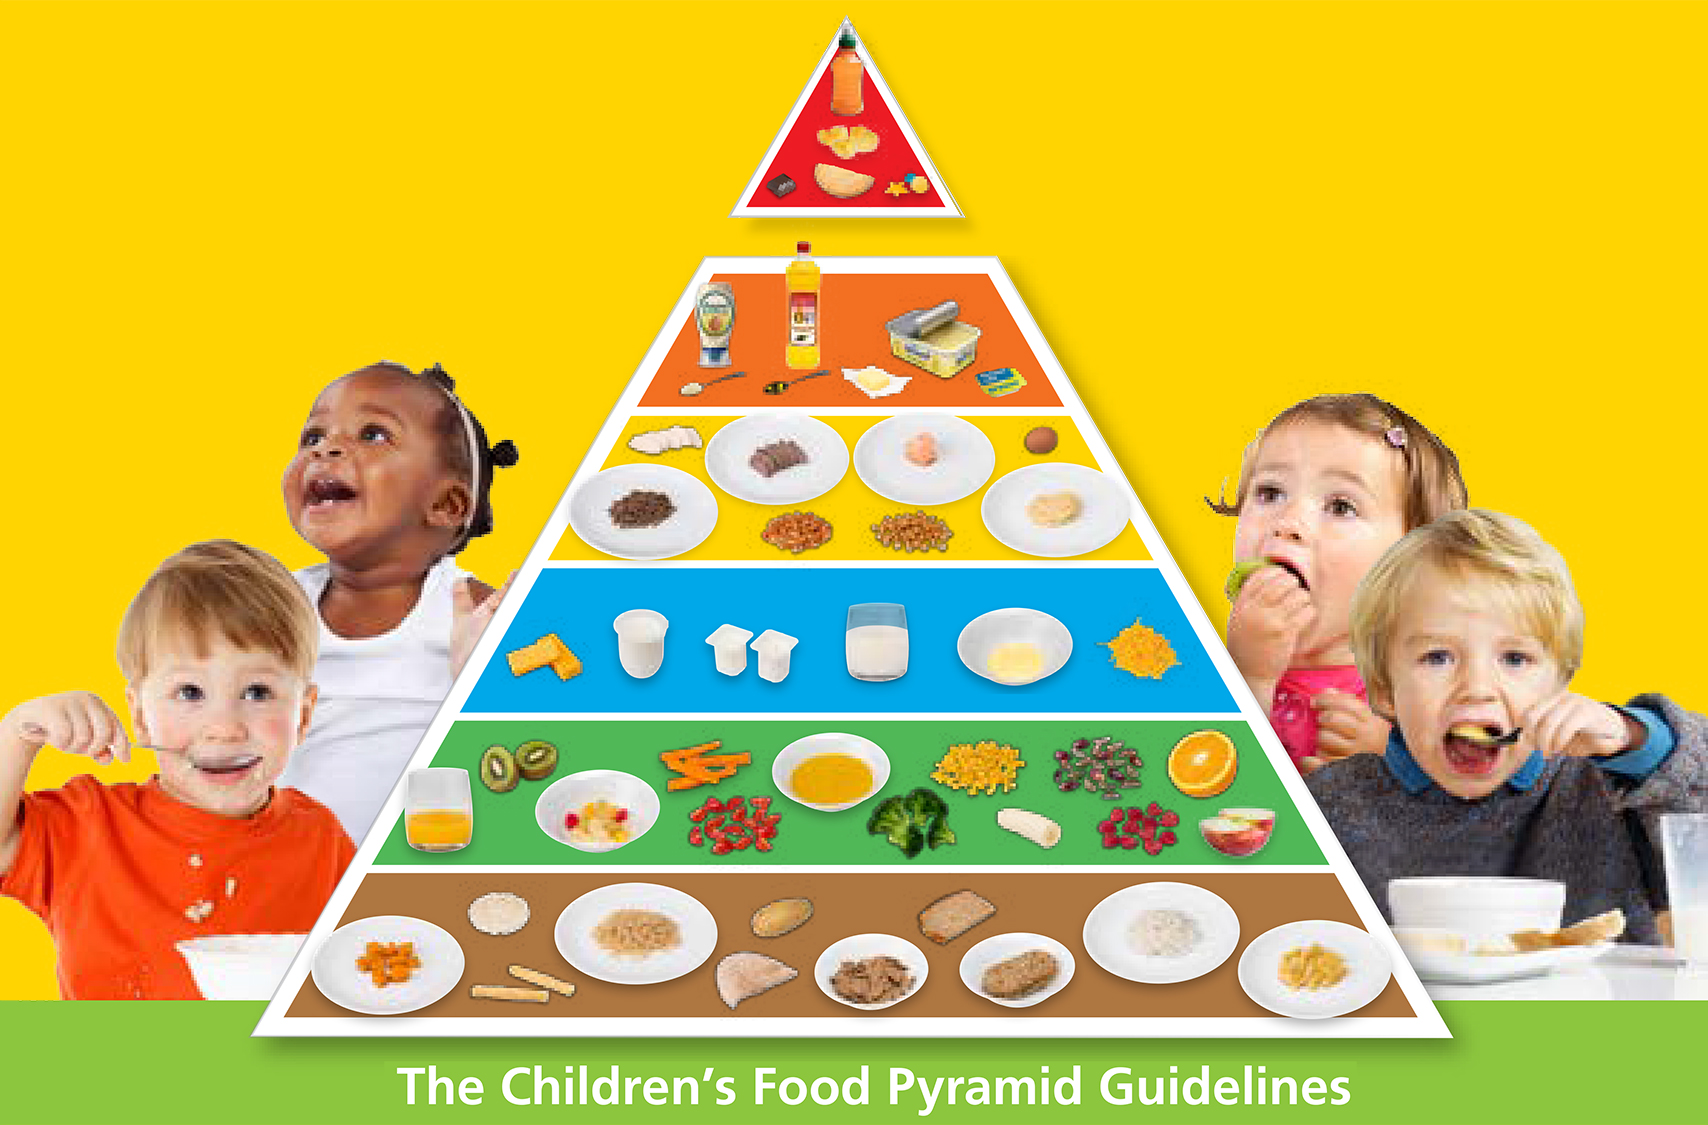 A parent's guide to the nutrition essentials for little eaters